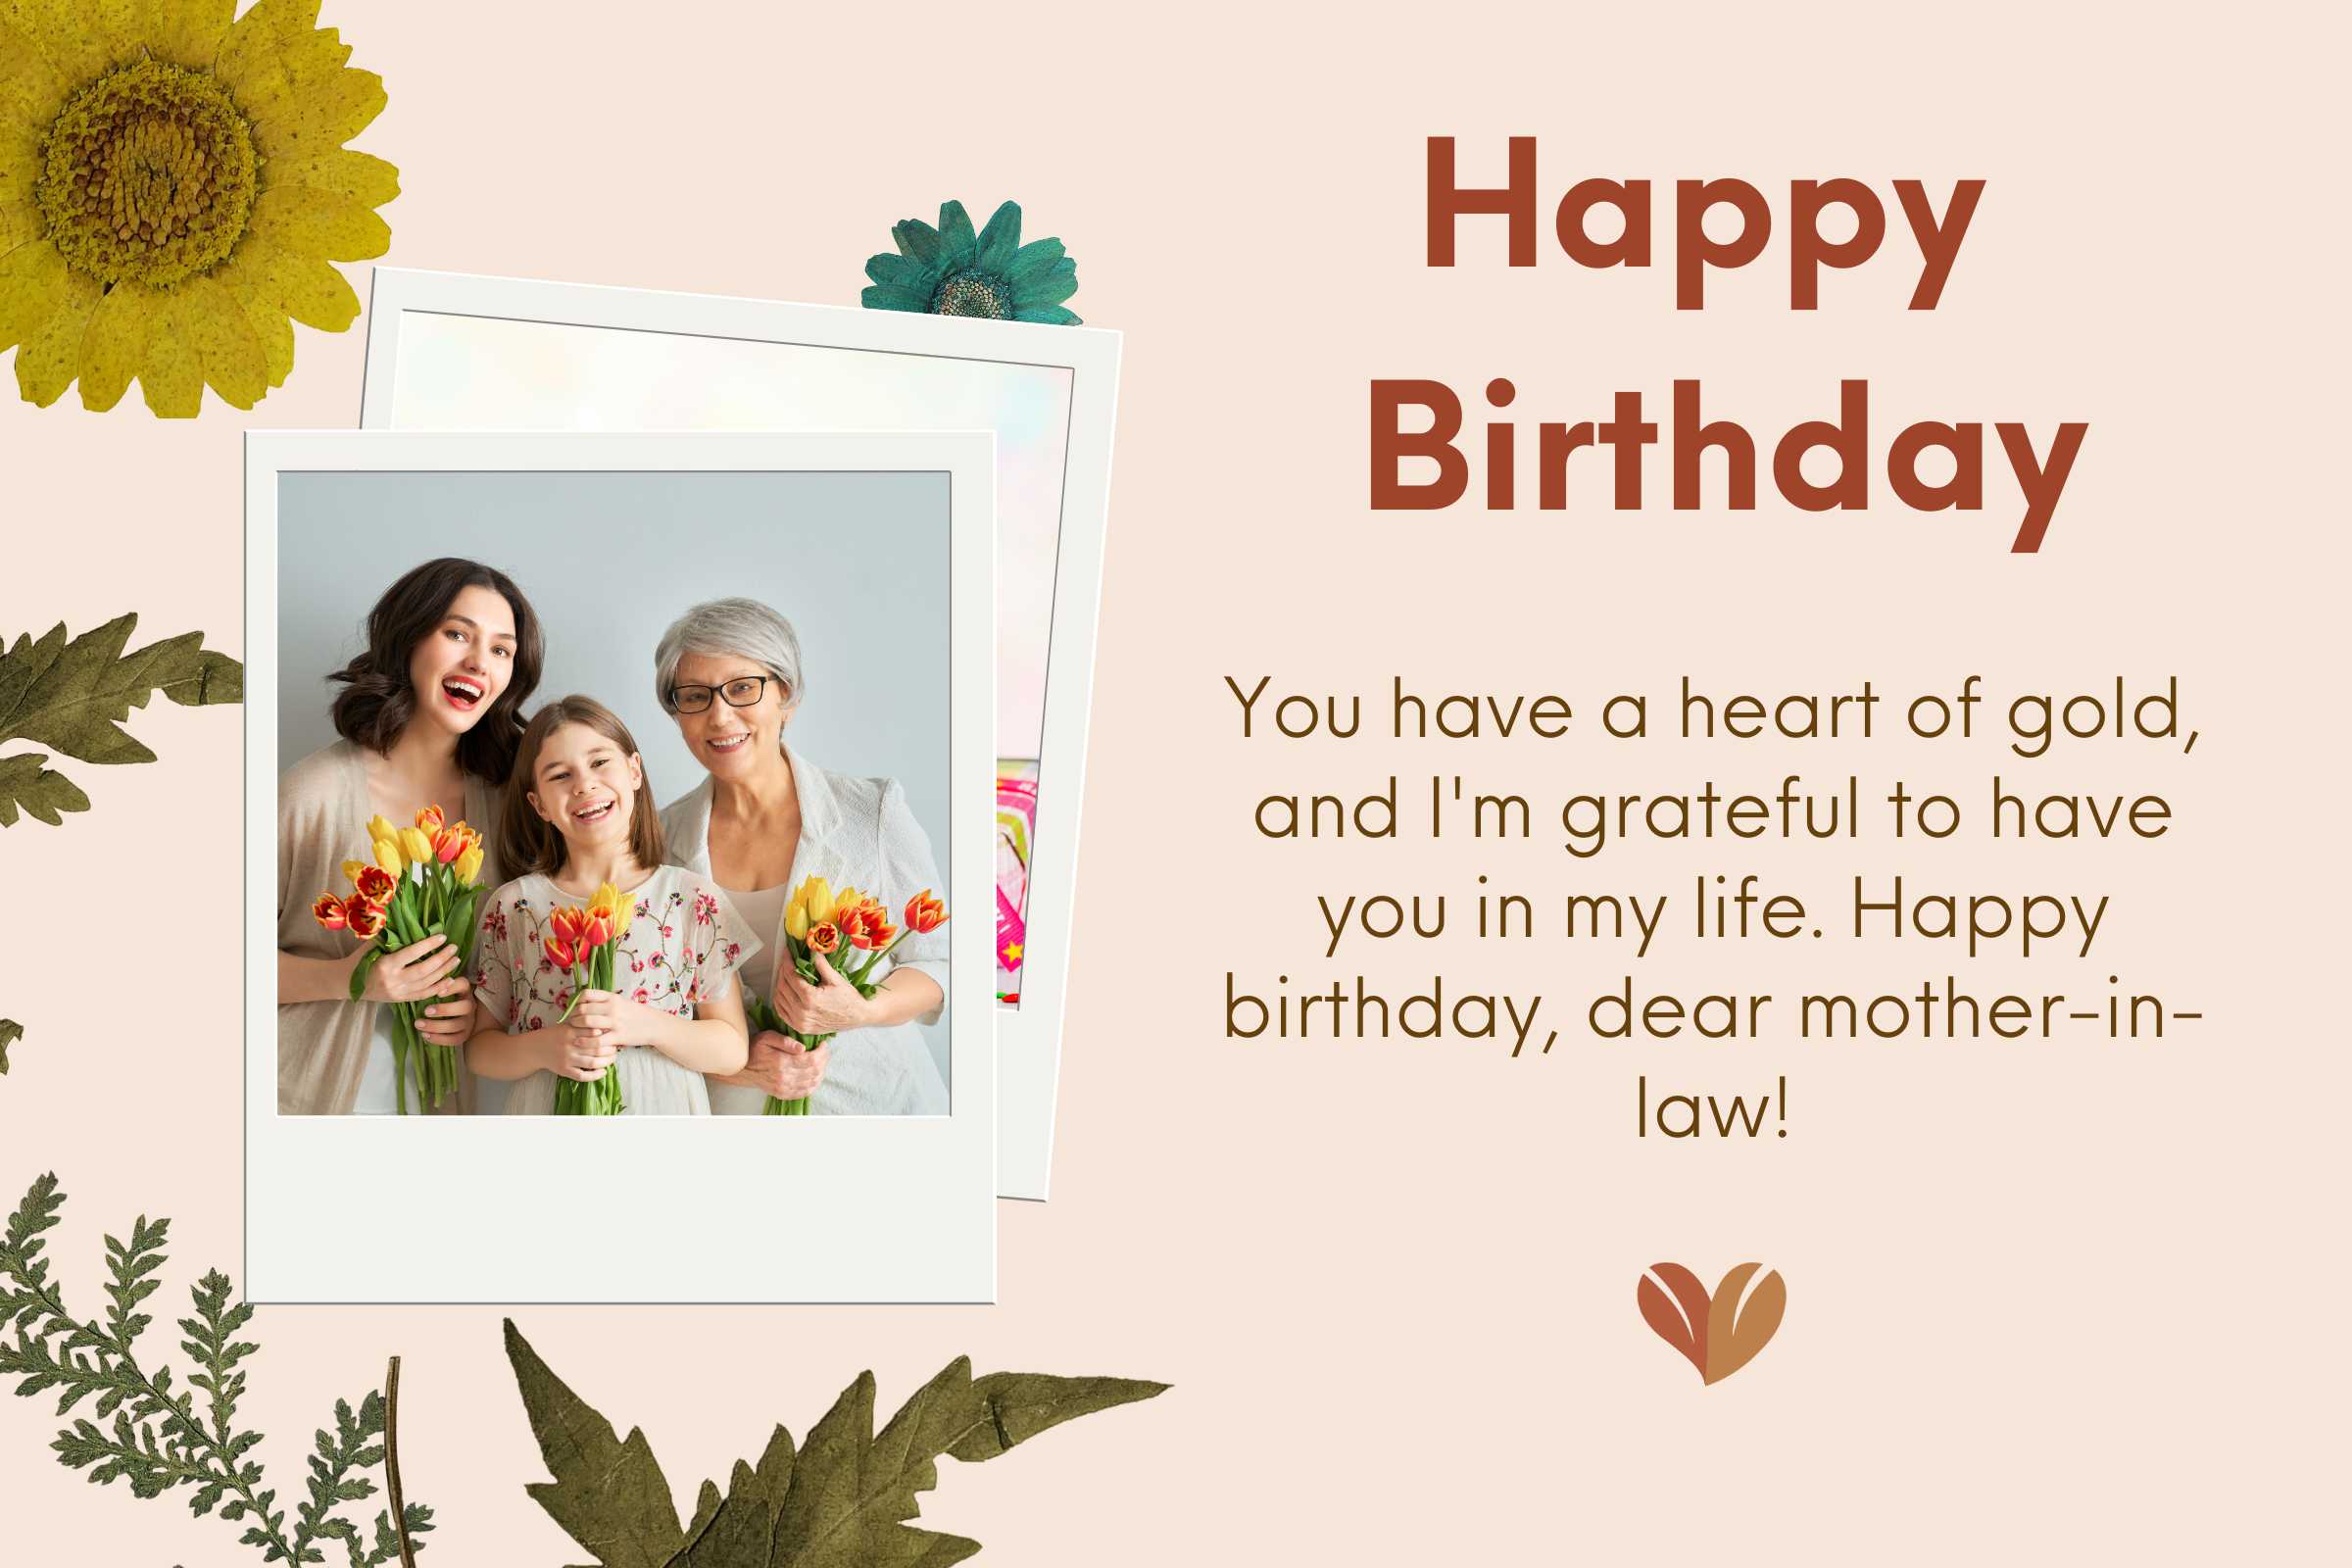 May your birthday be as sweet as you are - Birthday quotes for mother-in-law